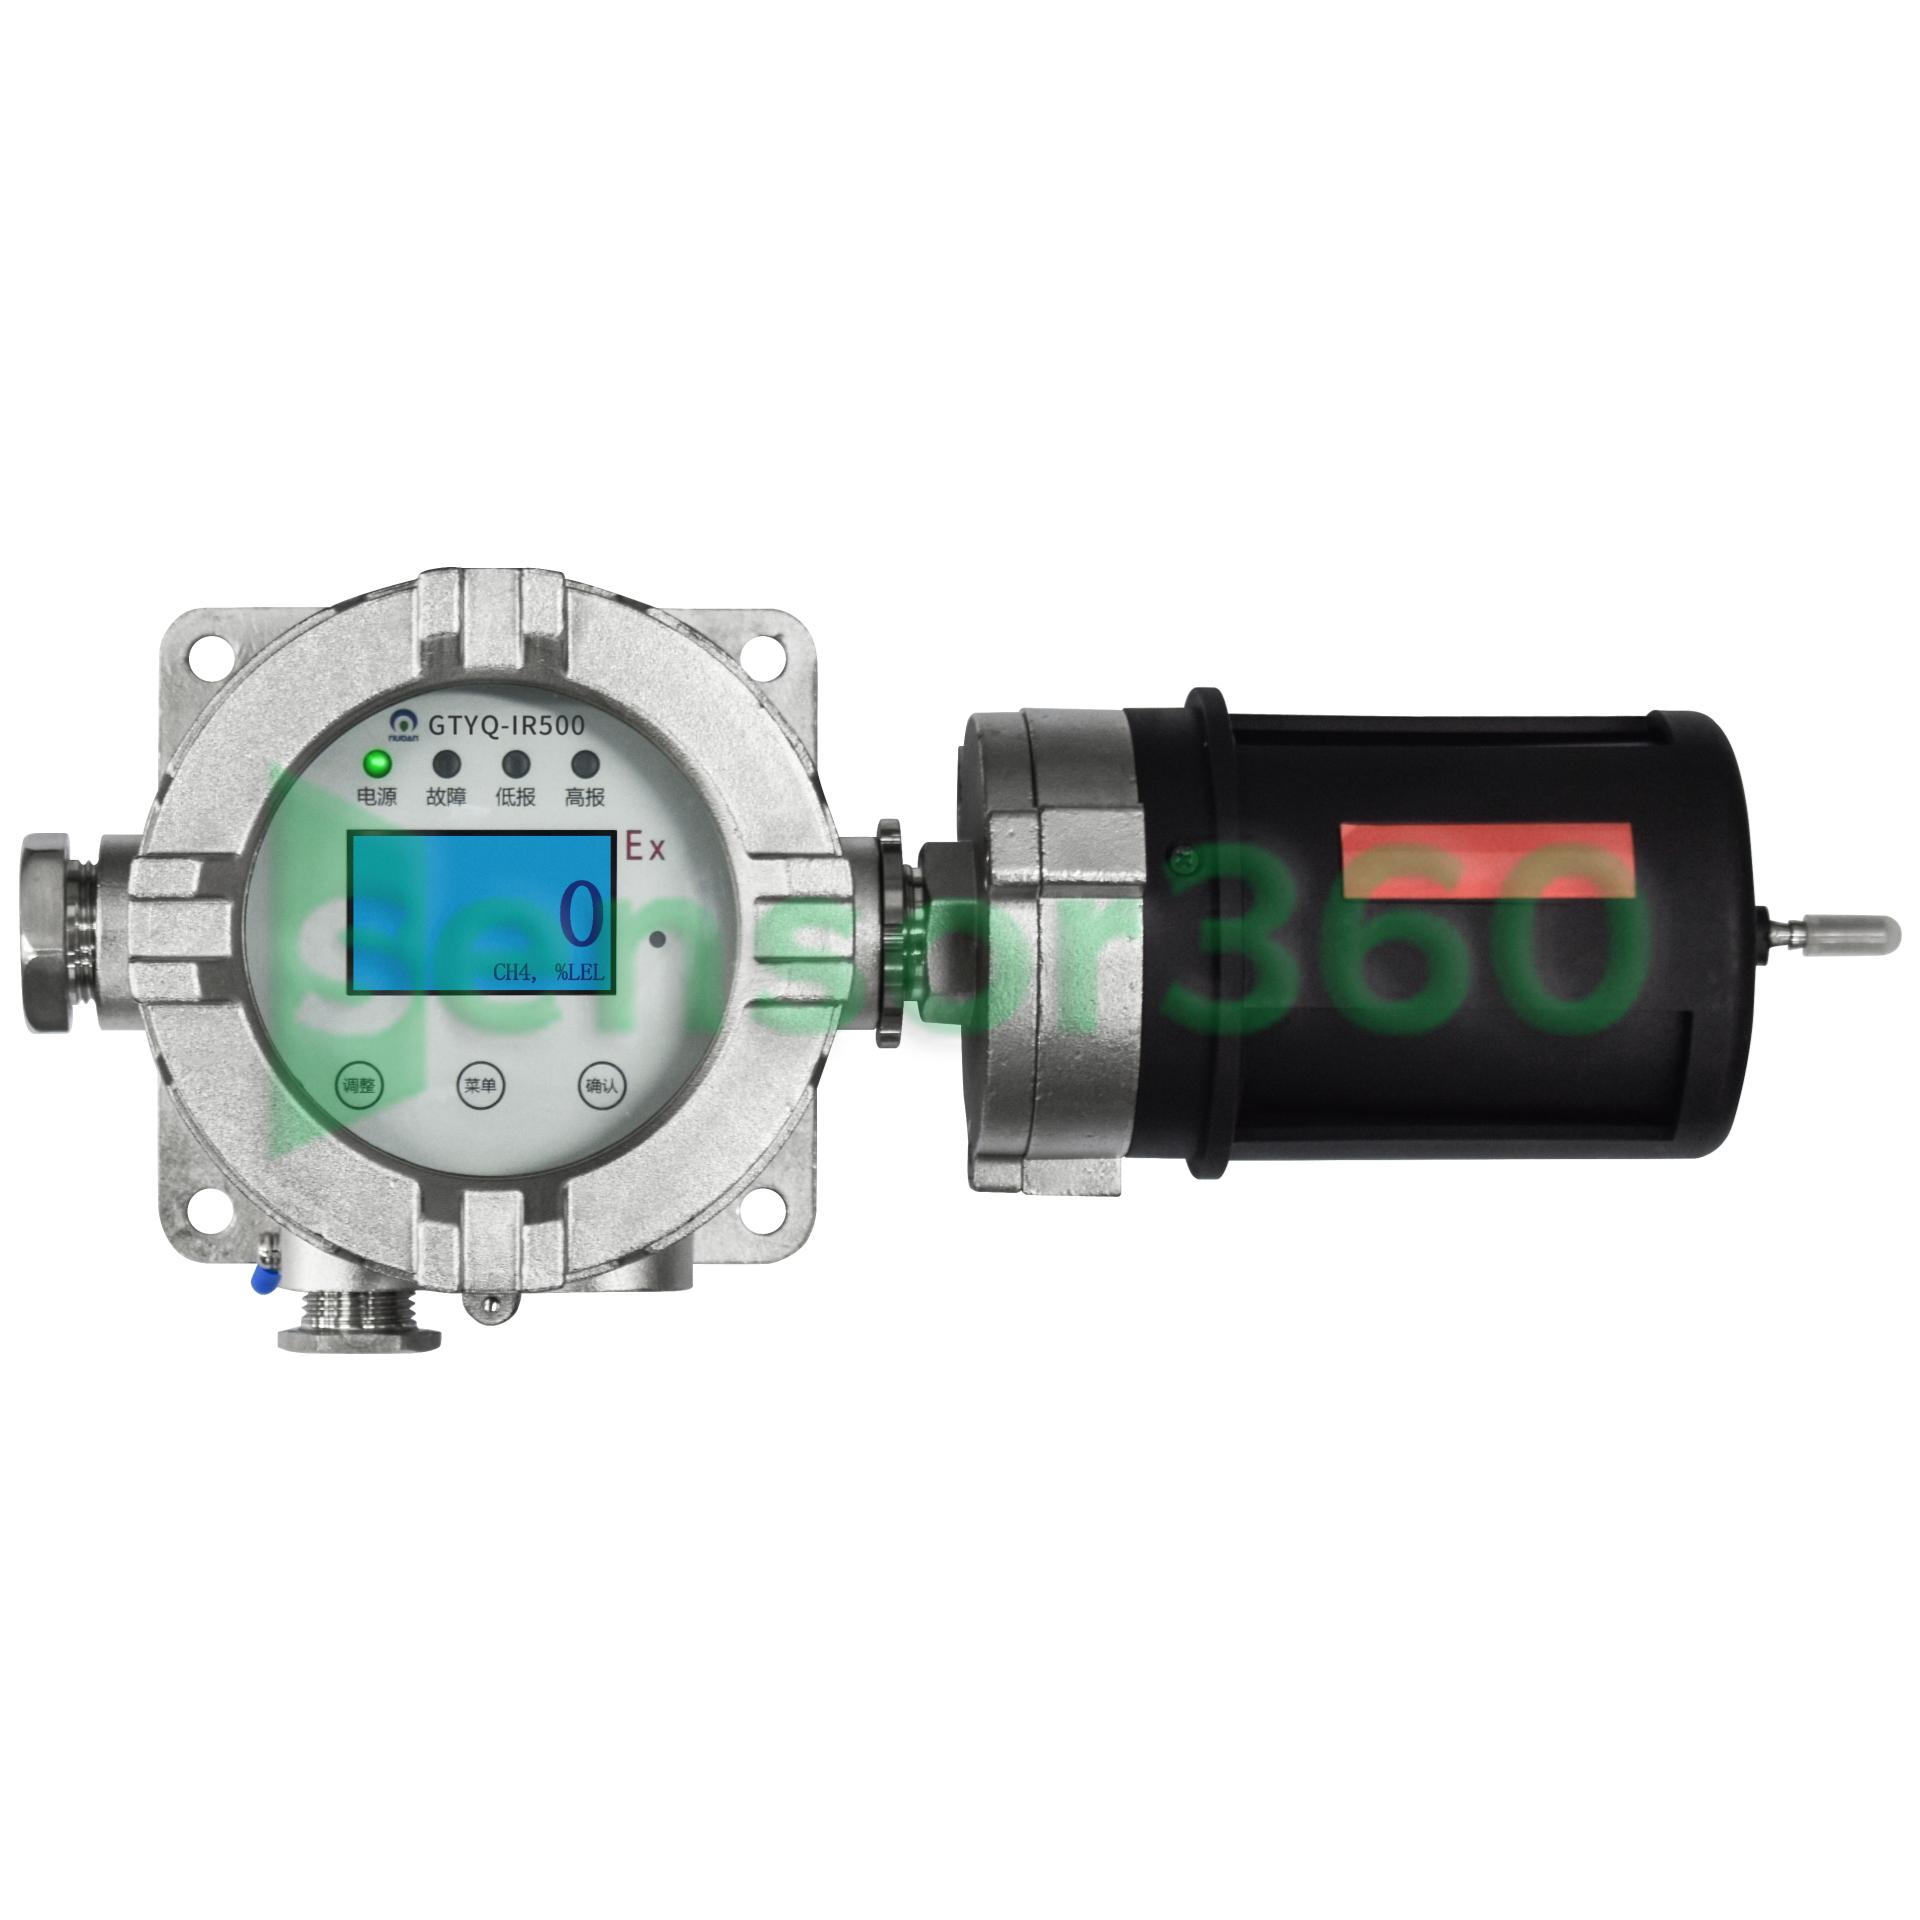 GTYQ-IR500 point type infrared combustible gas detector